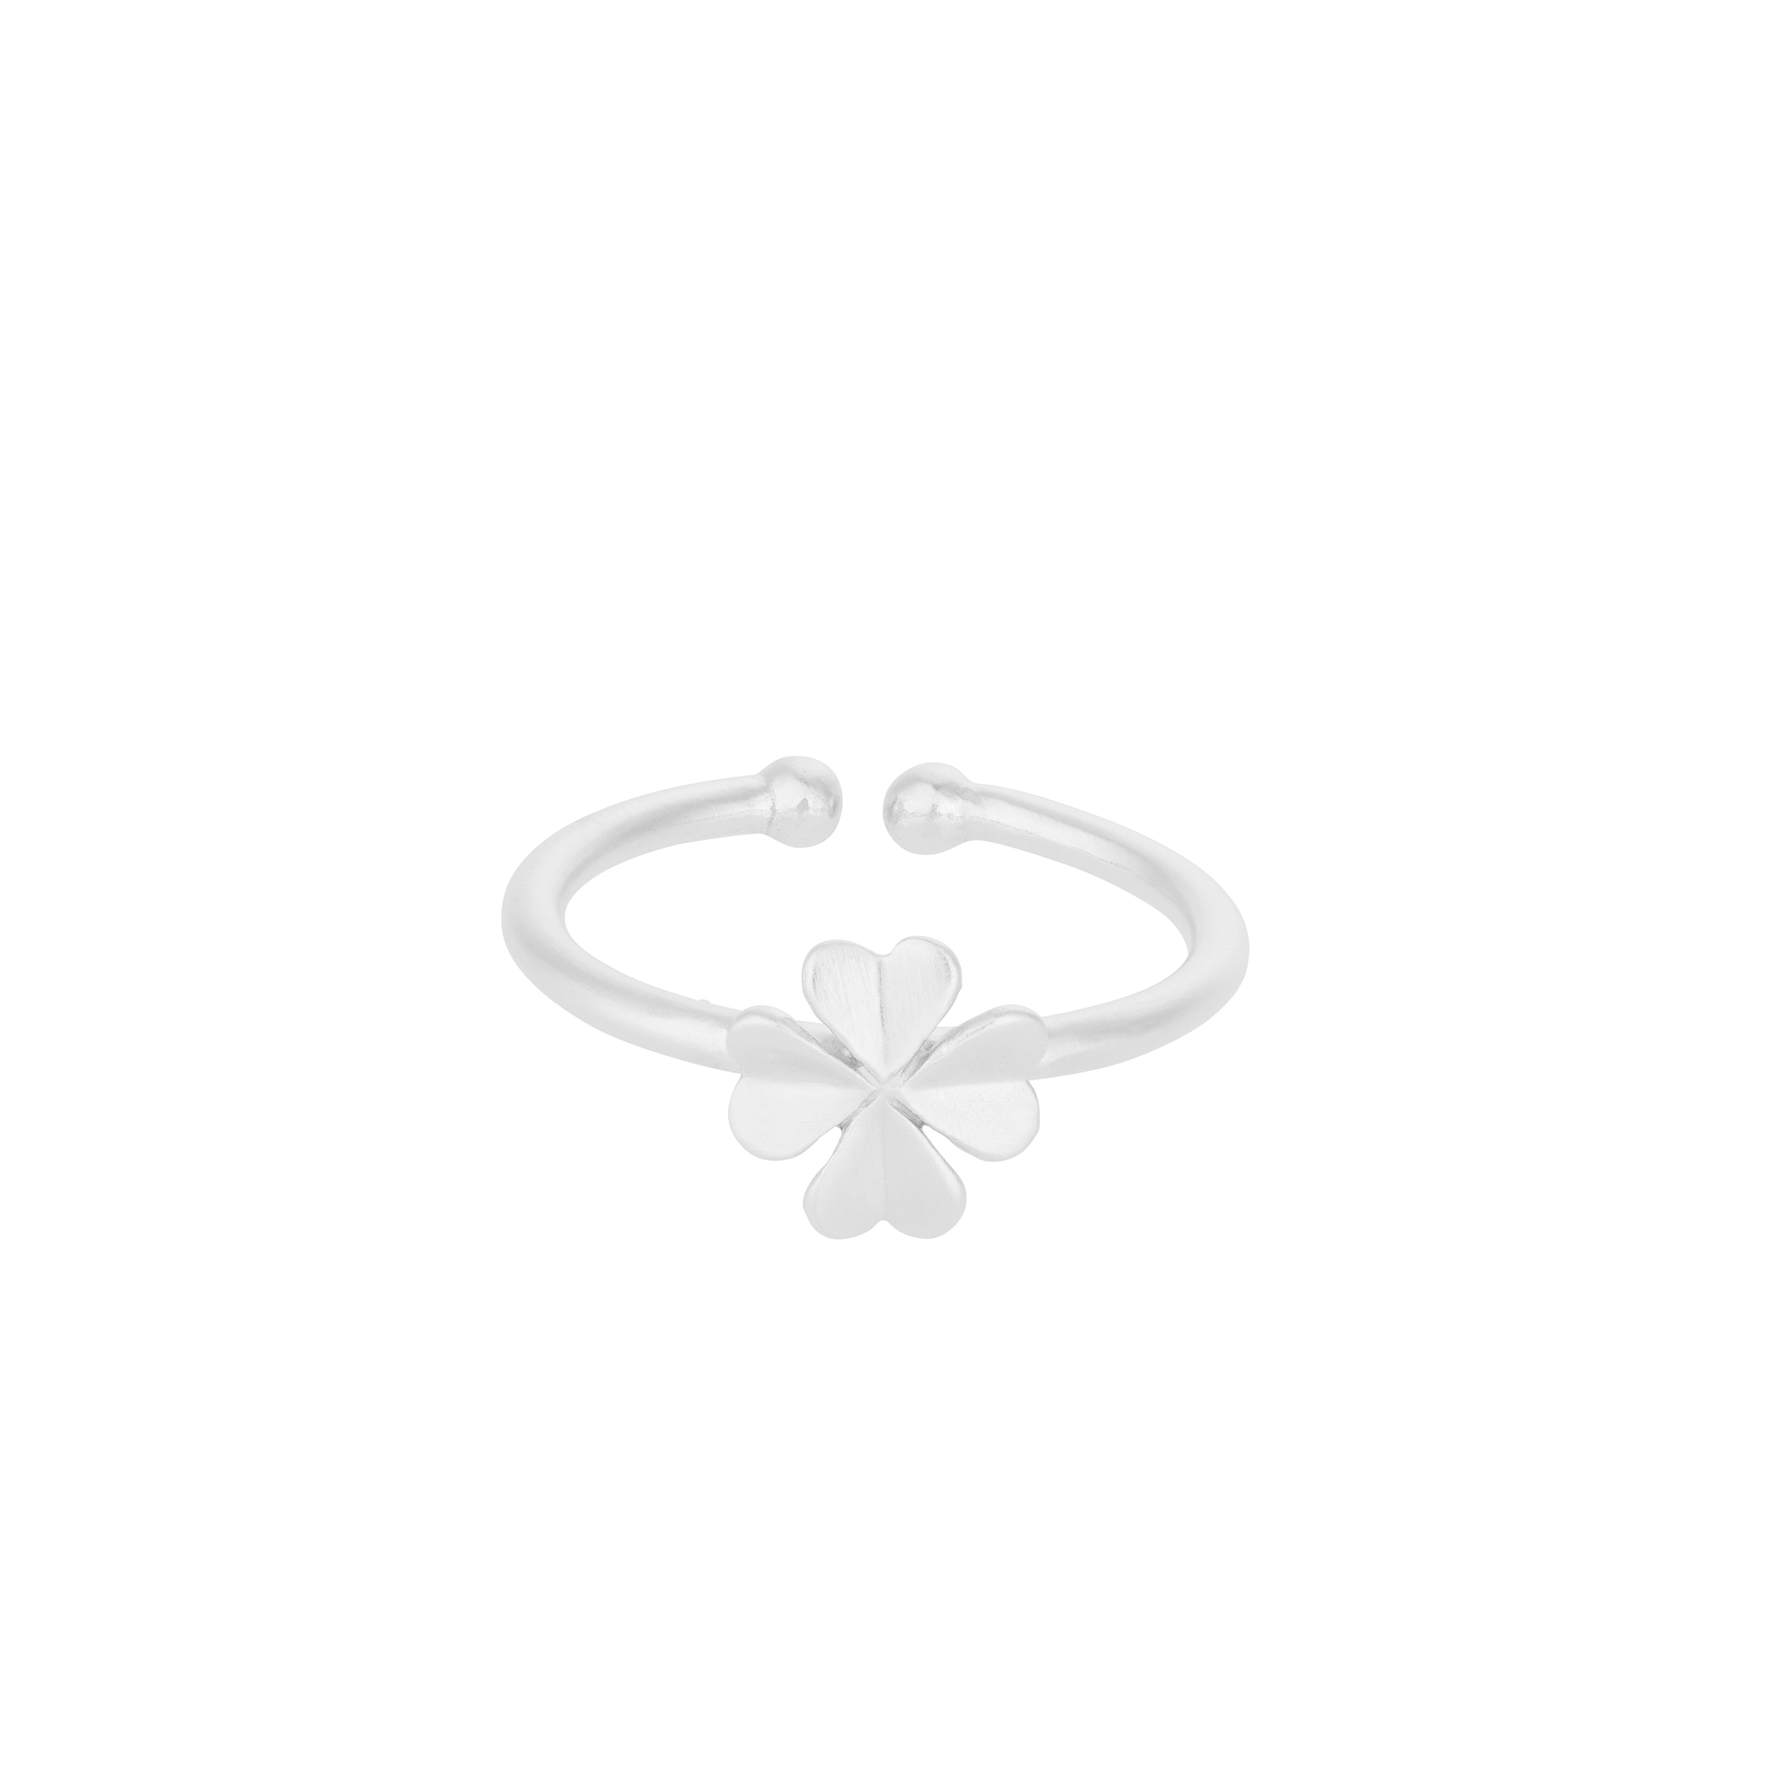 Clover Ring from Pernille Corydon in Silver Sterling 925